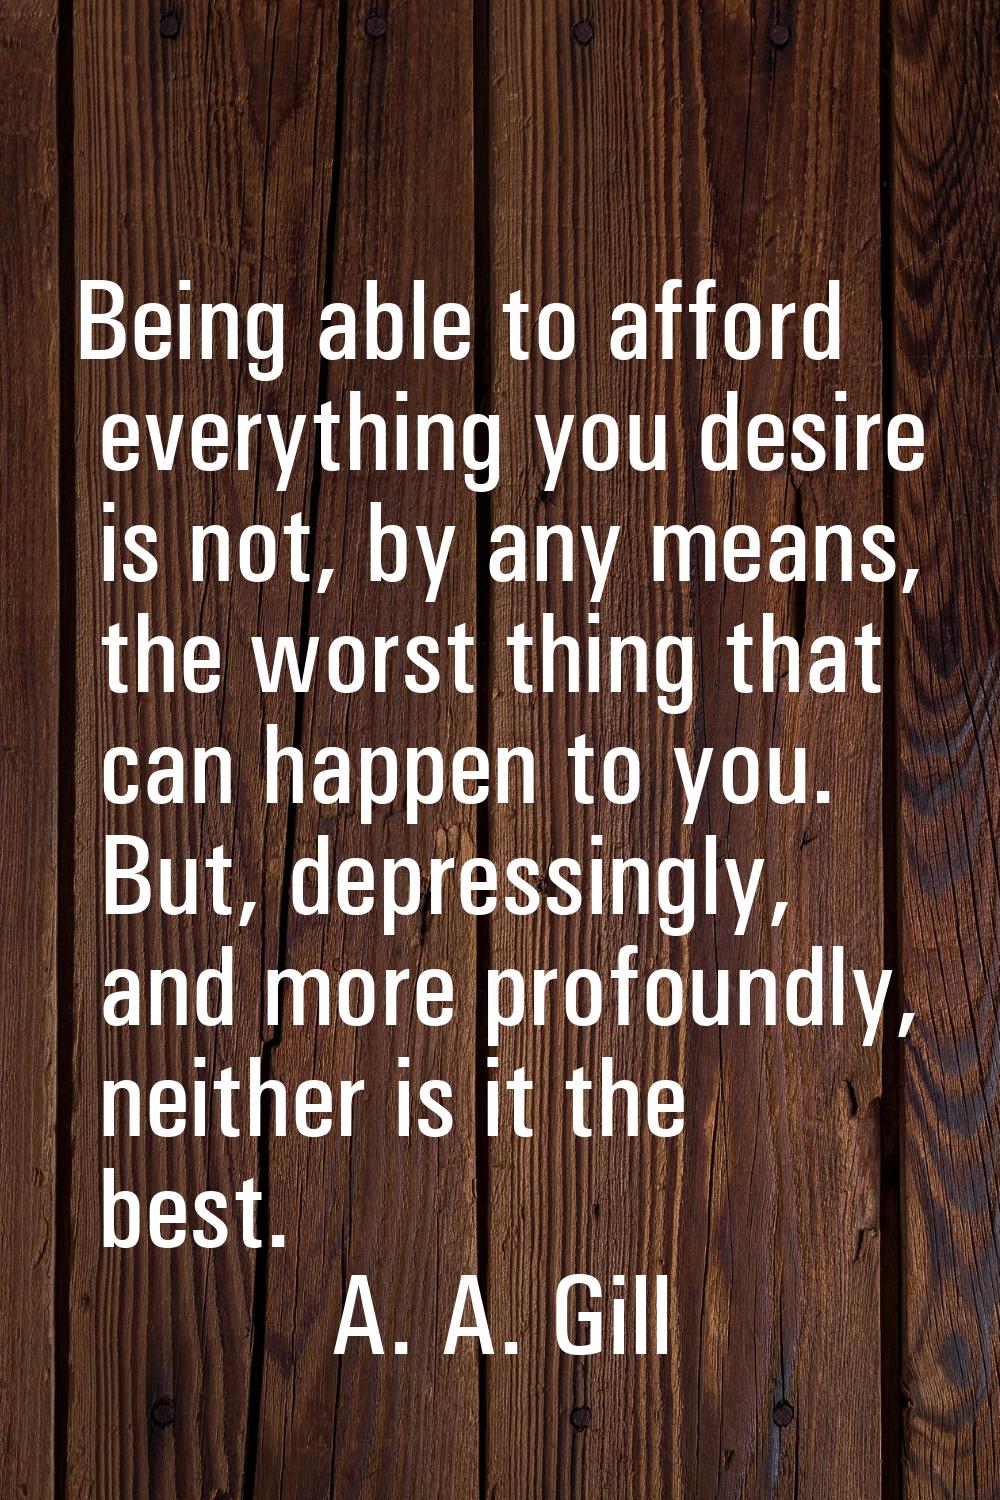 Being able to afford everything you desire is not, by any means, the worst thing that can happen to